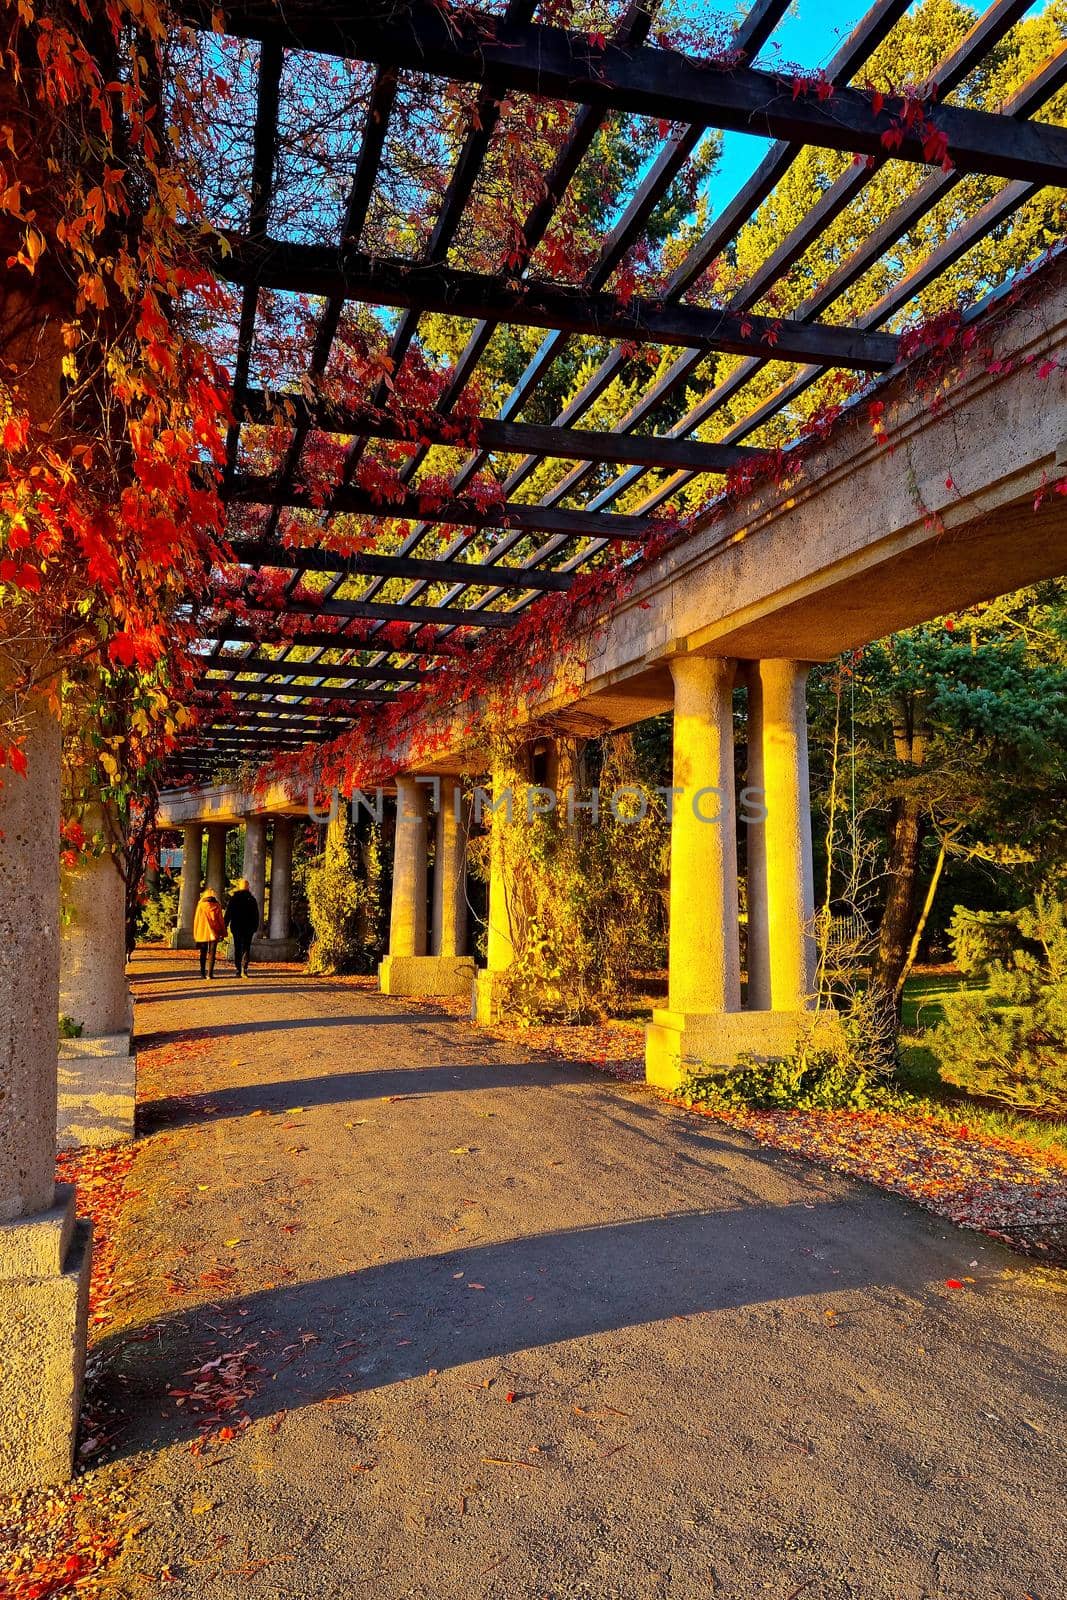 A picturesque view of the concrete structure in the park in autumn. by kip02kas